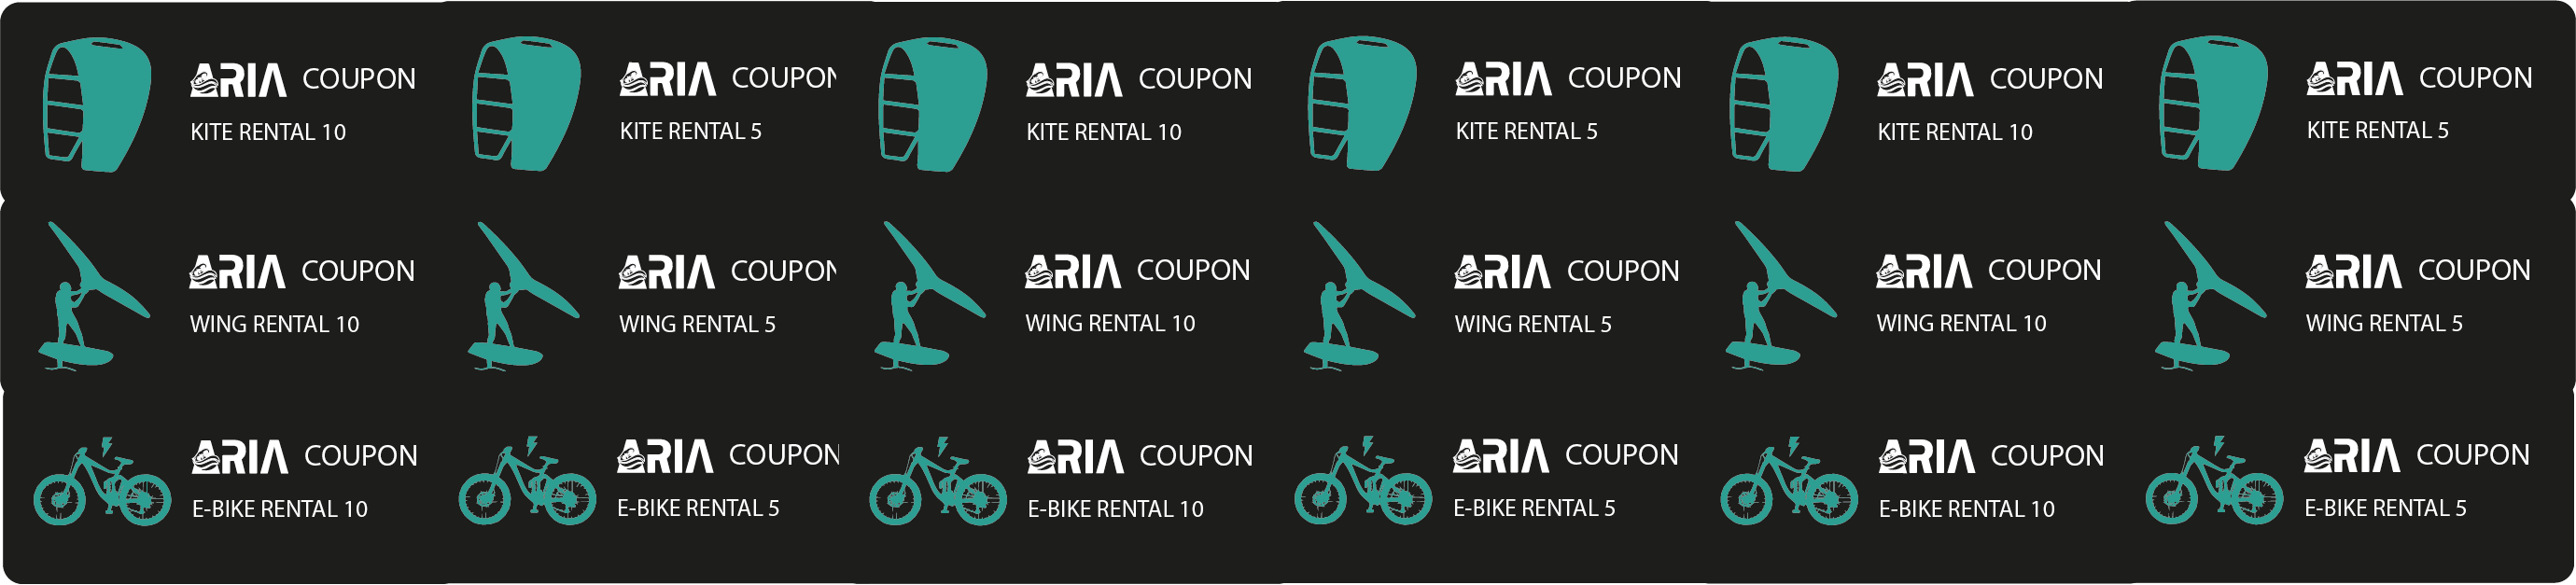 Soar to Savings: New Coupons for Kite, Wing, and E-Bike Rentals!